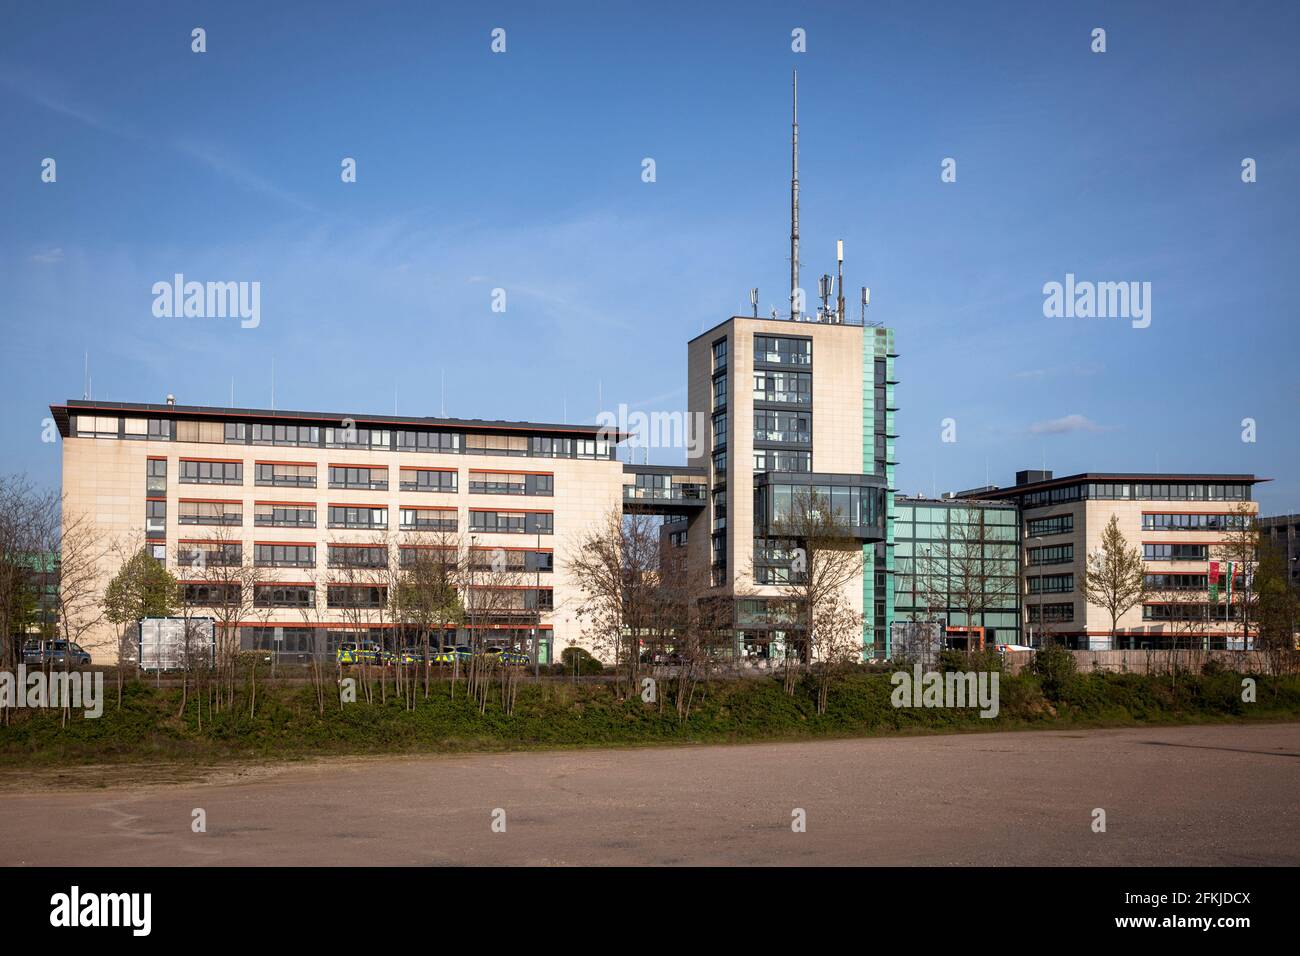 Polizeiwache High Resolution Stock Photography and Images - Alamy